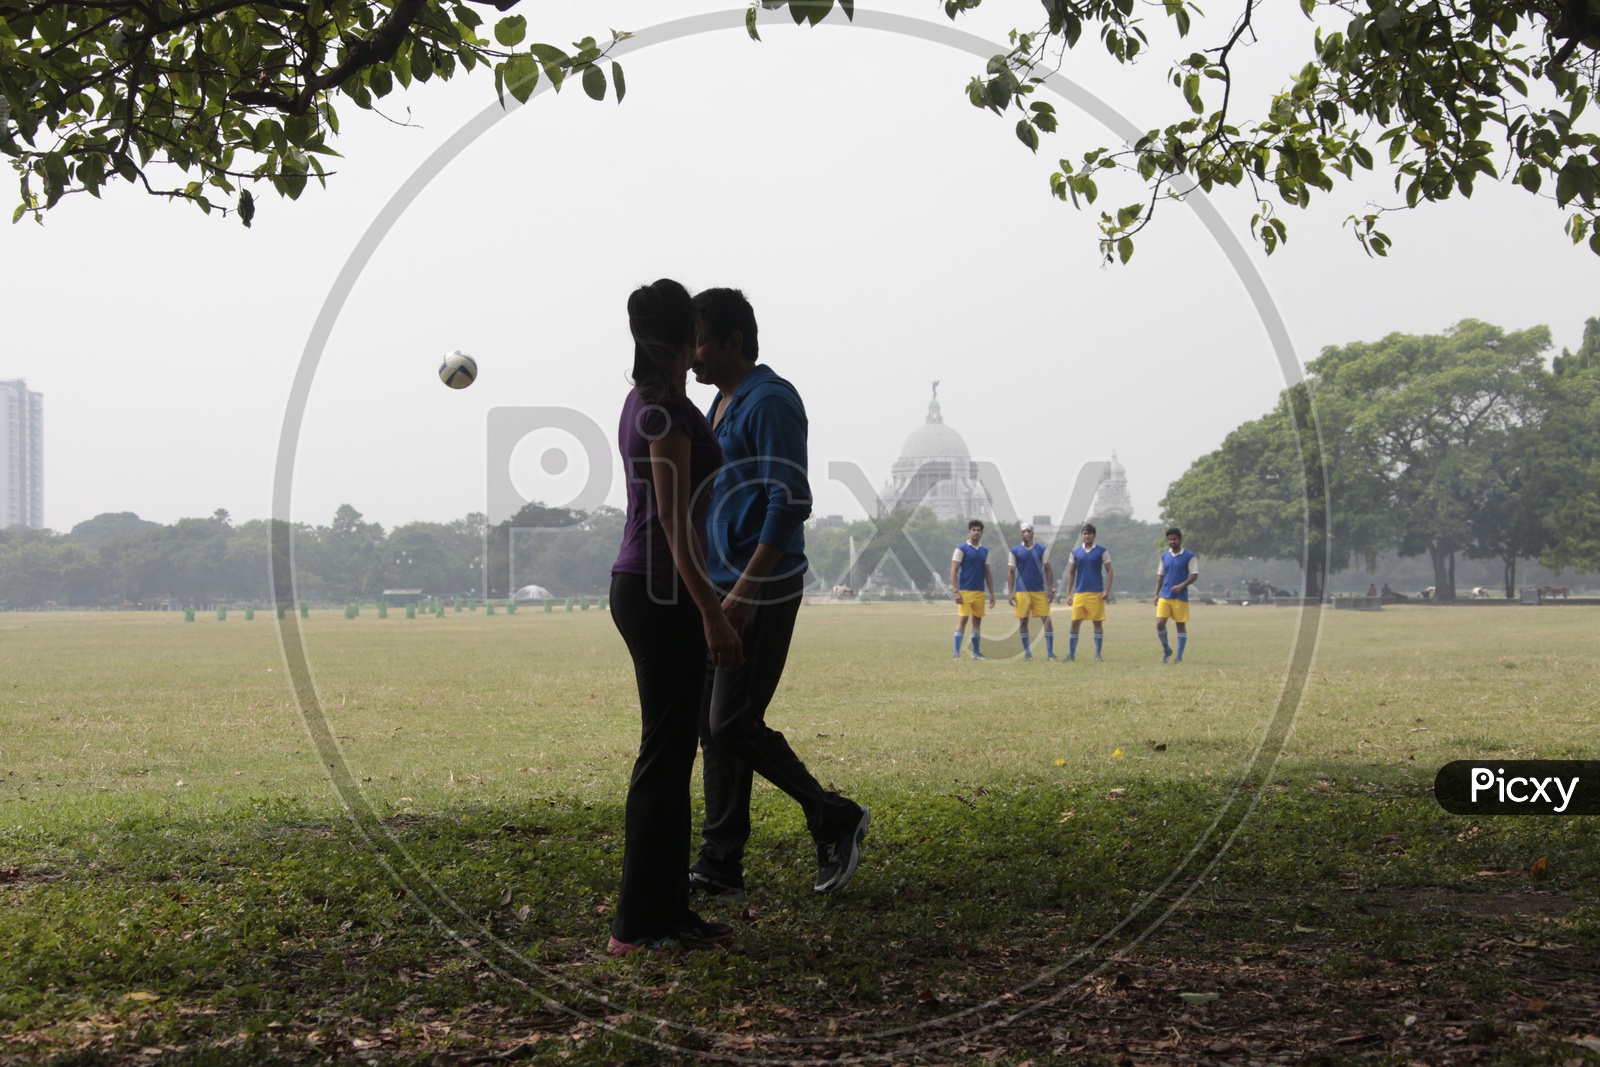 A Couple In a Football Court